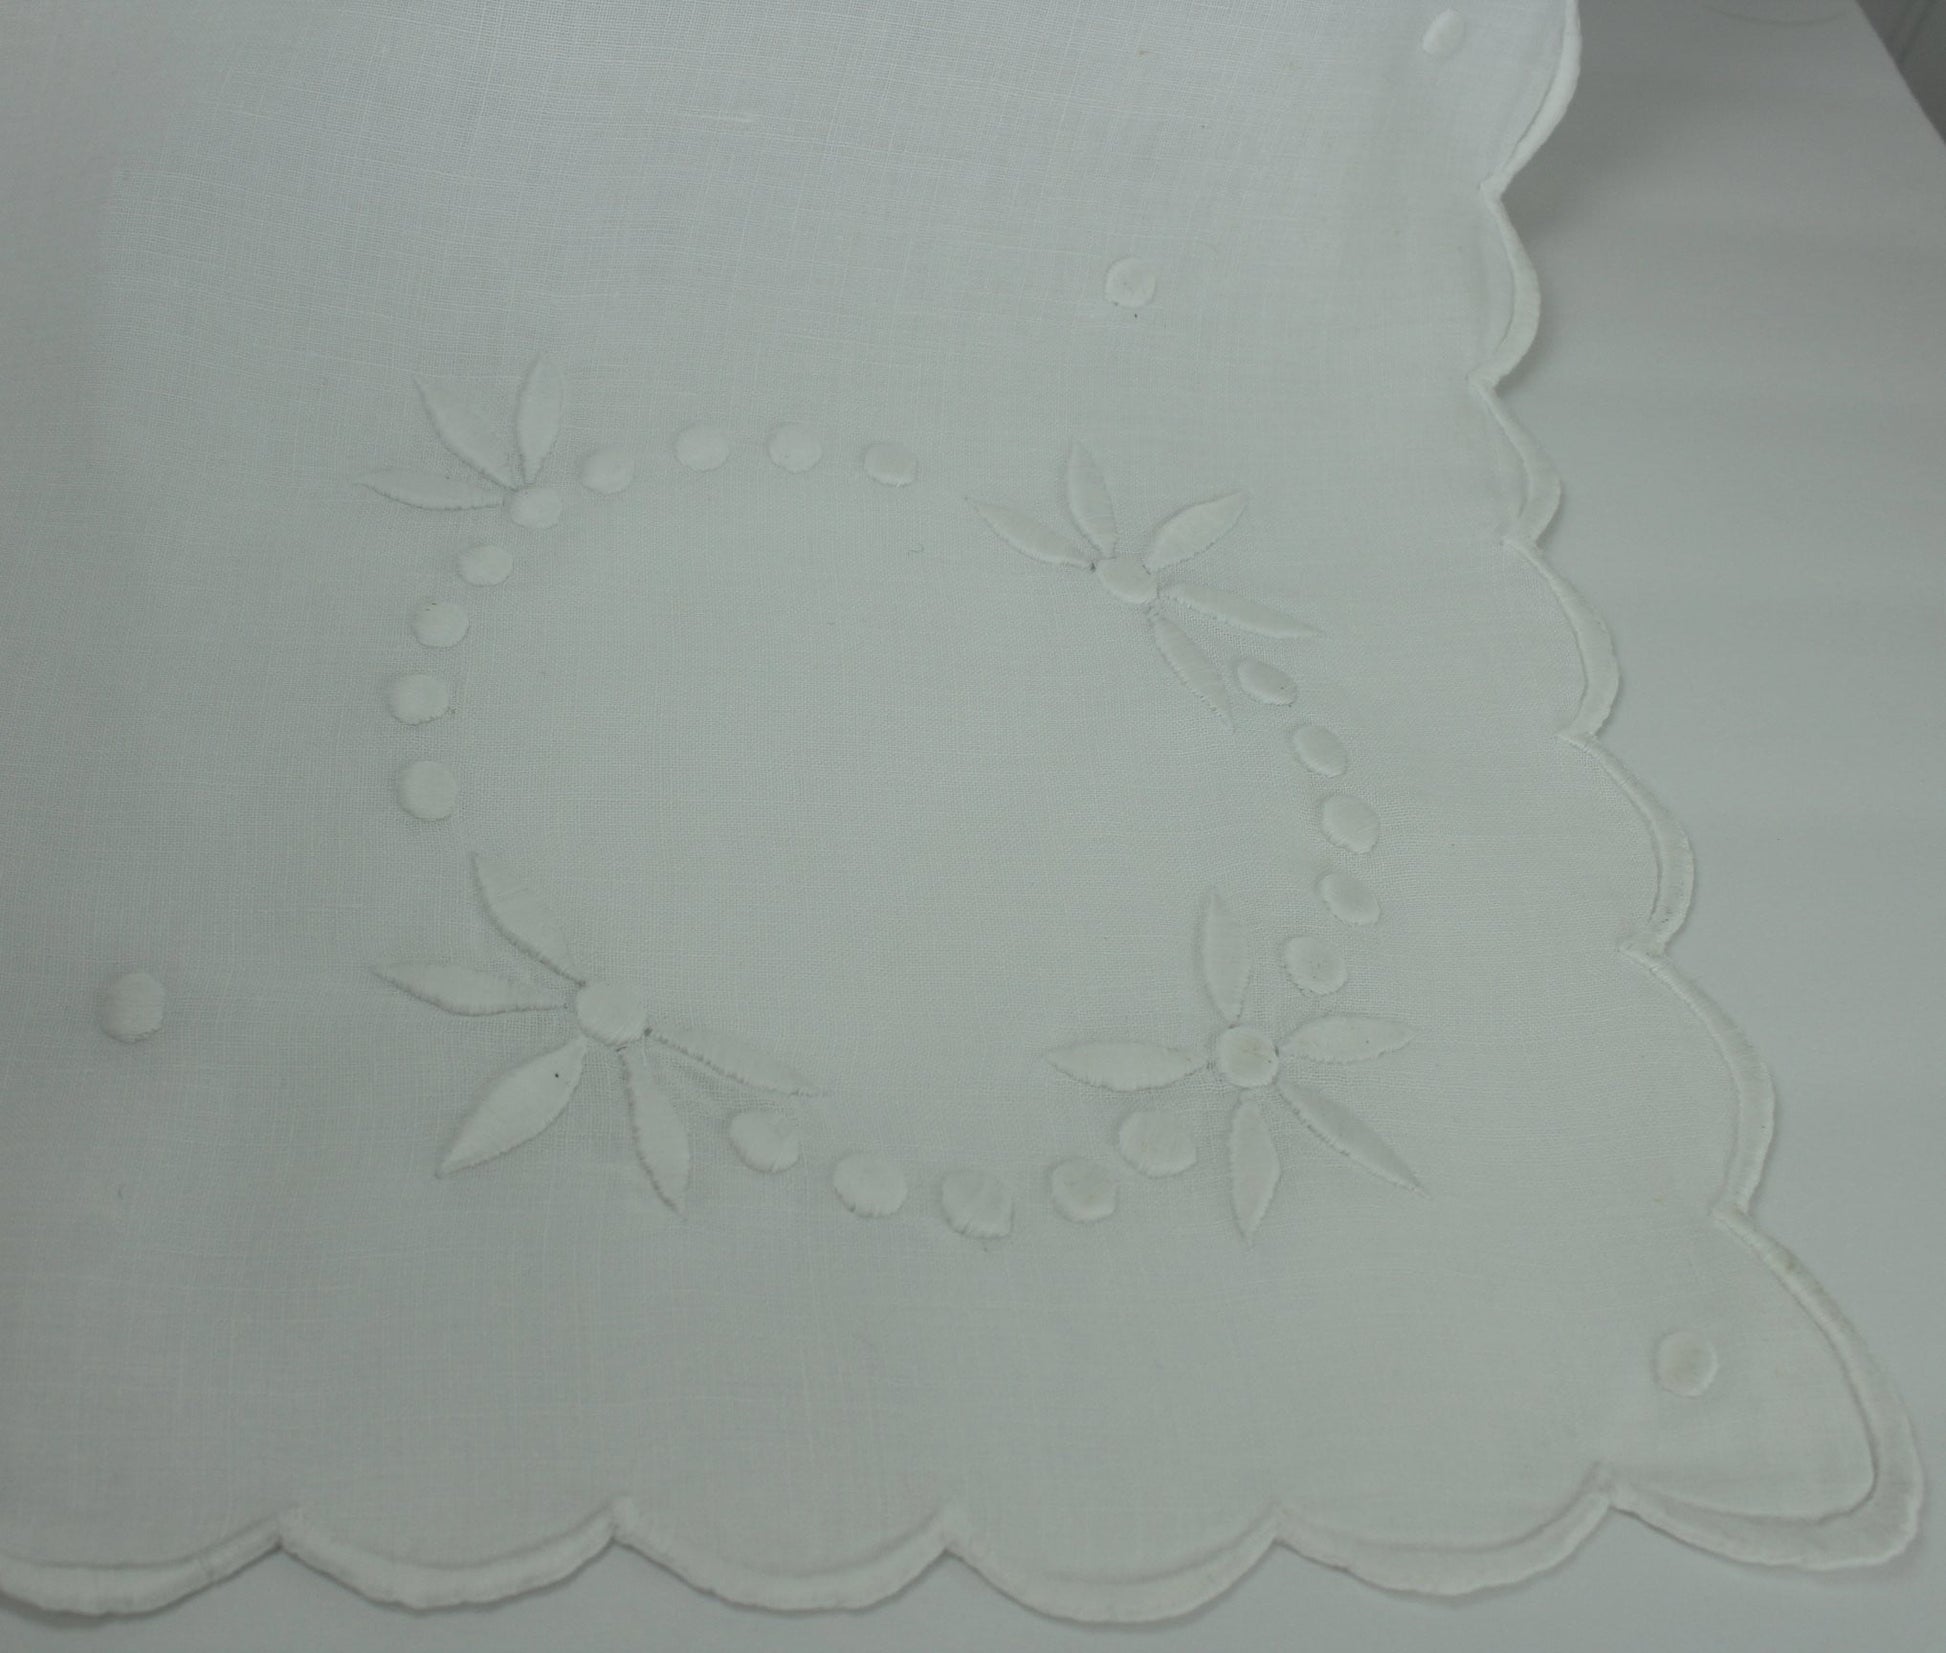 Antique Small White Linen Table Cloth - Early 1900s - Monogram "D" Floral ssatin stitch